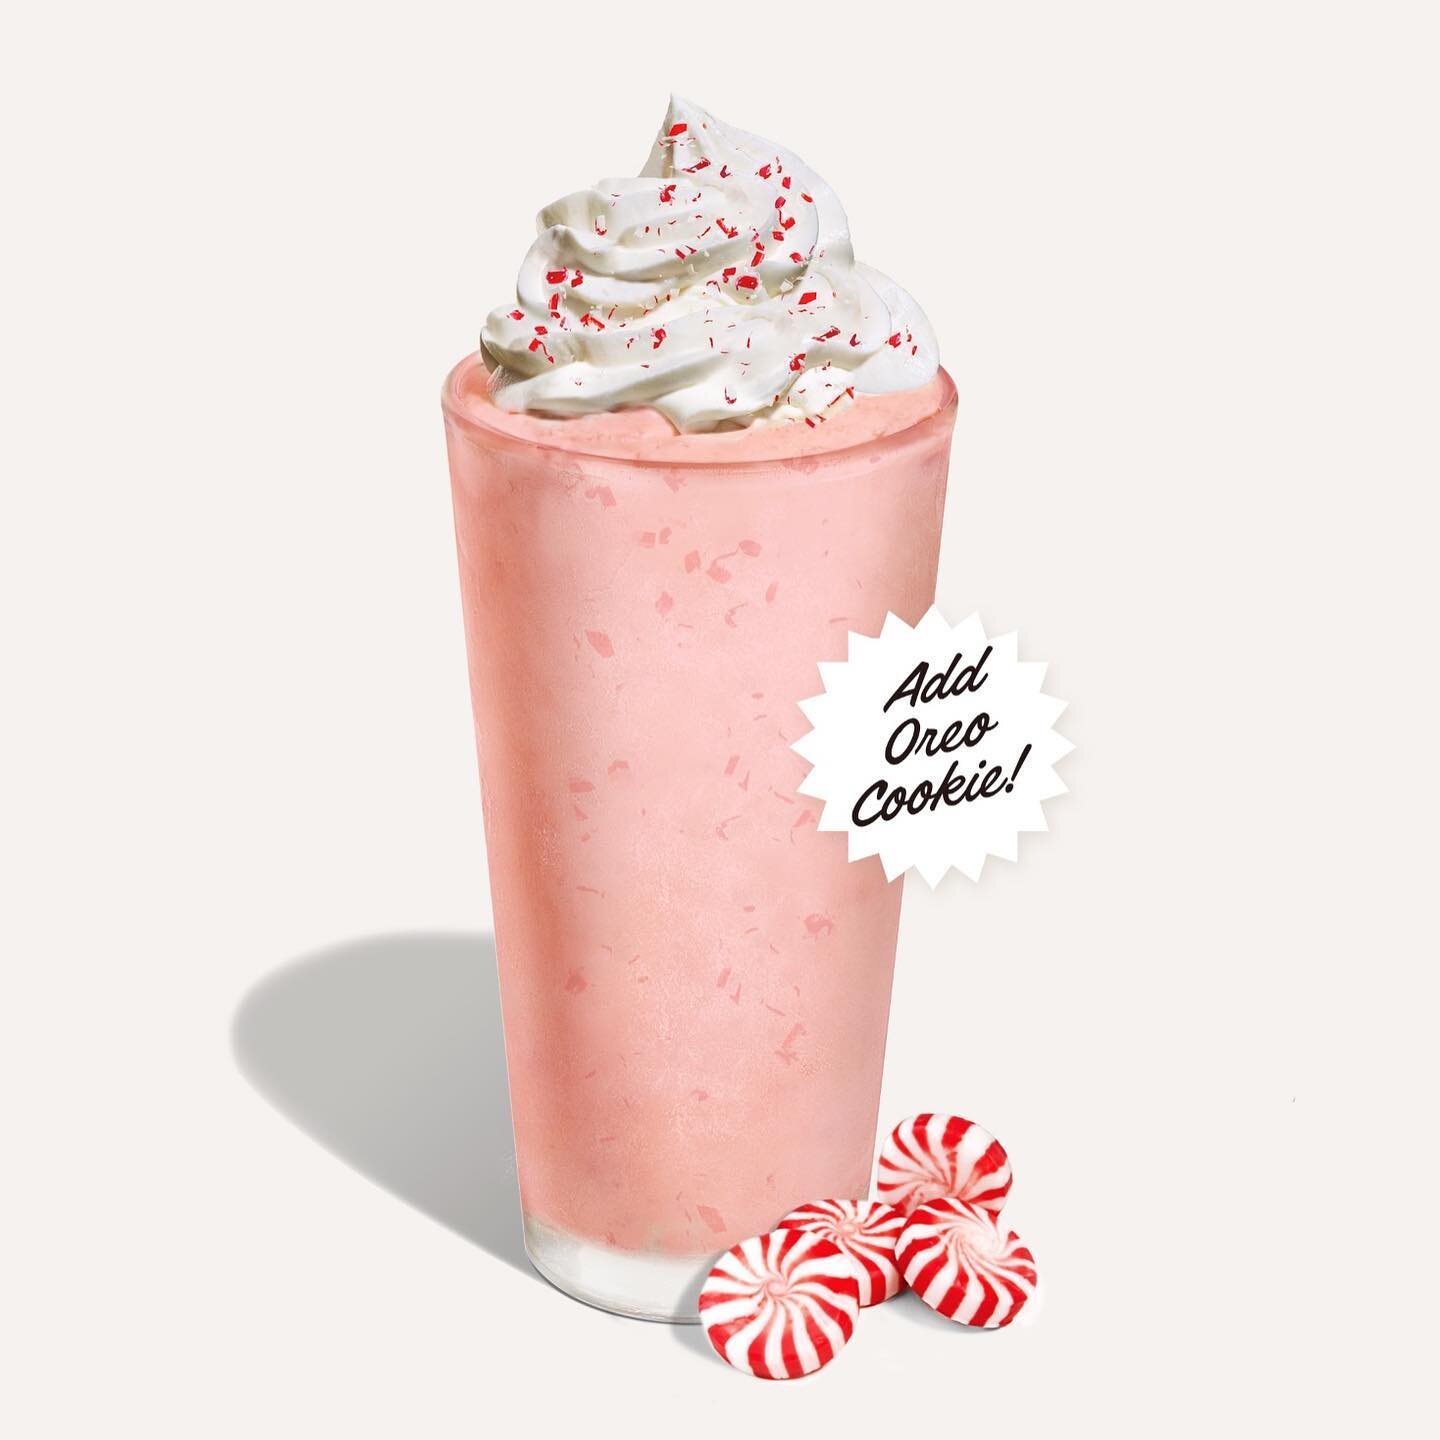 If you haven&rsquo;t had a peppermint milkshake from Hires Big H, has the holiday season even begun? Try adding Oreo for a shake that will quickly make it to the top of your Christmas wish list. #hiresbigh #peppermintshake #peppermintoreo #eatlocal #